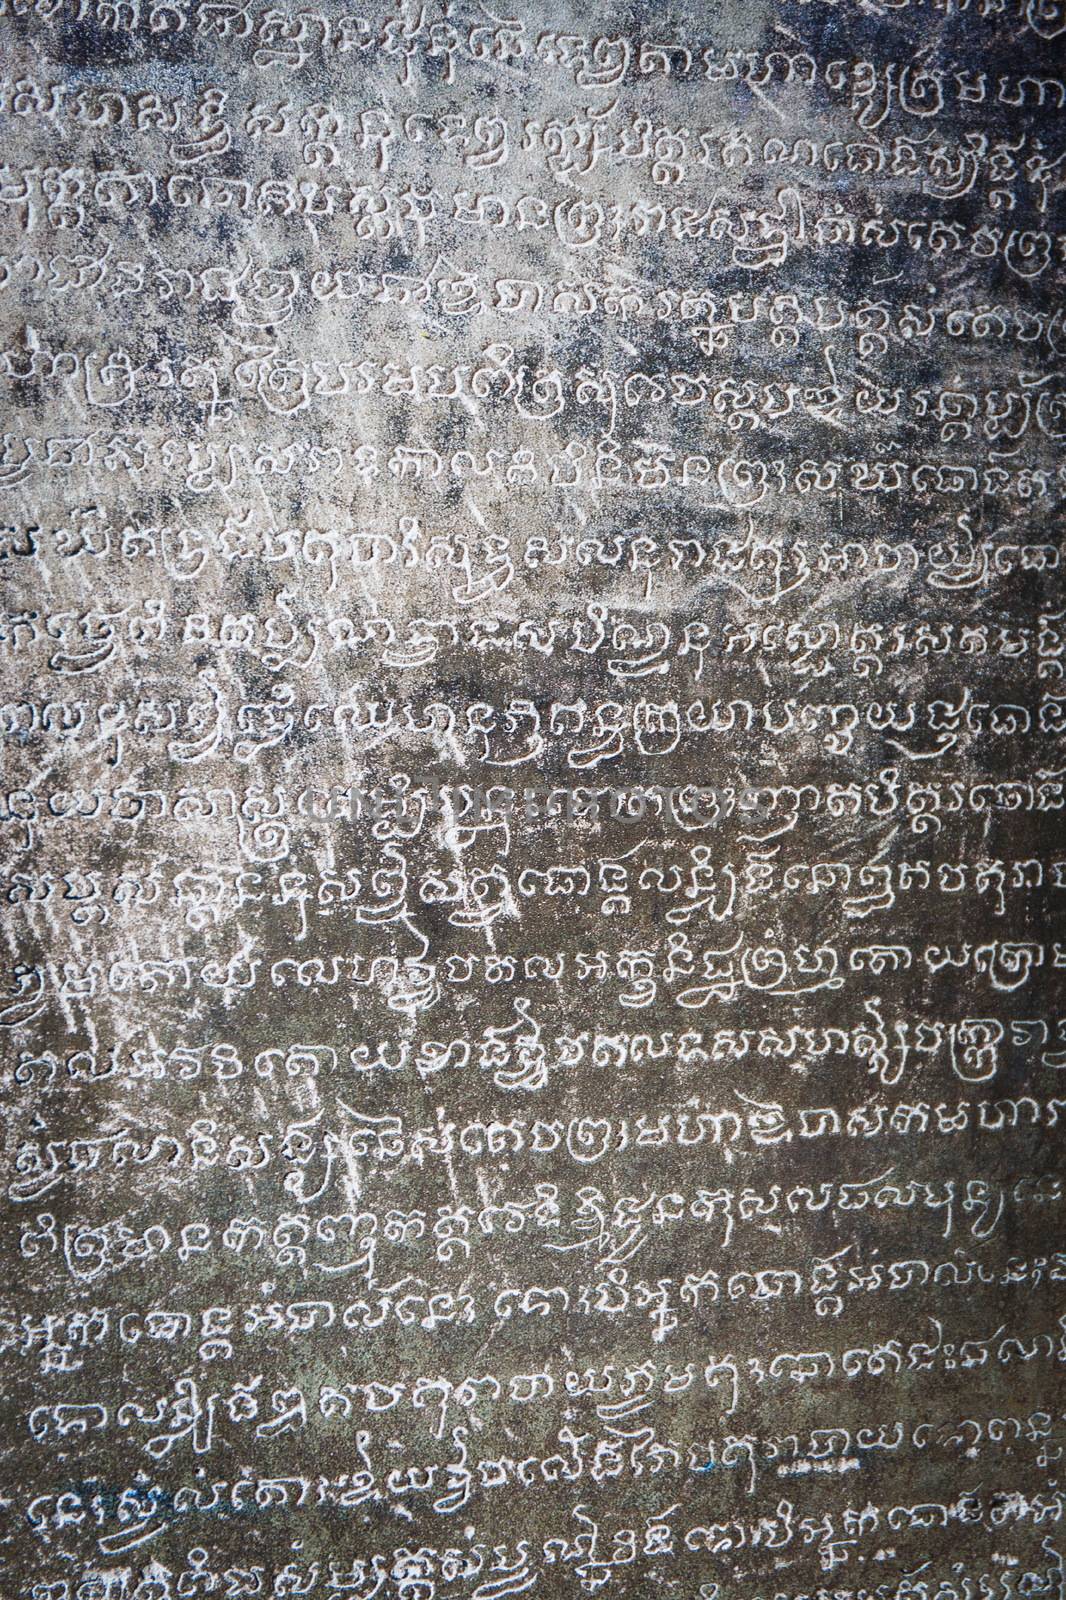 Close up of Khmer writing on a wall, Cambodia